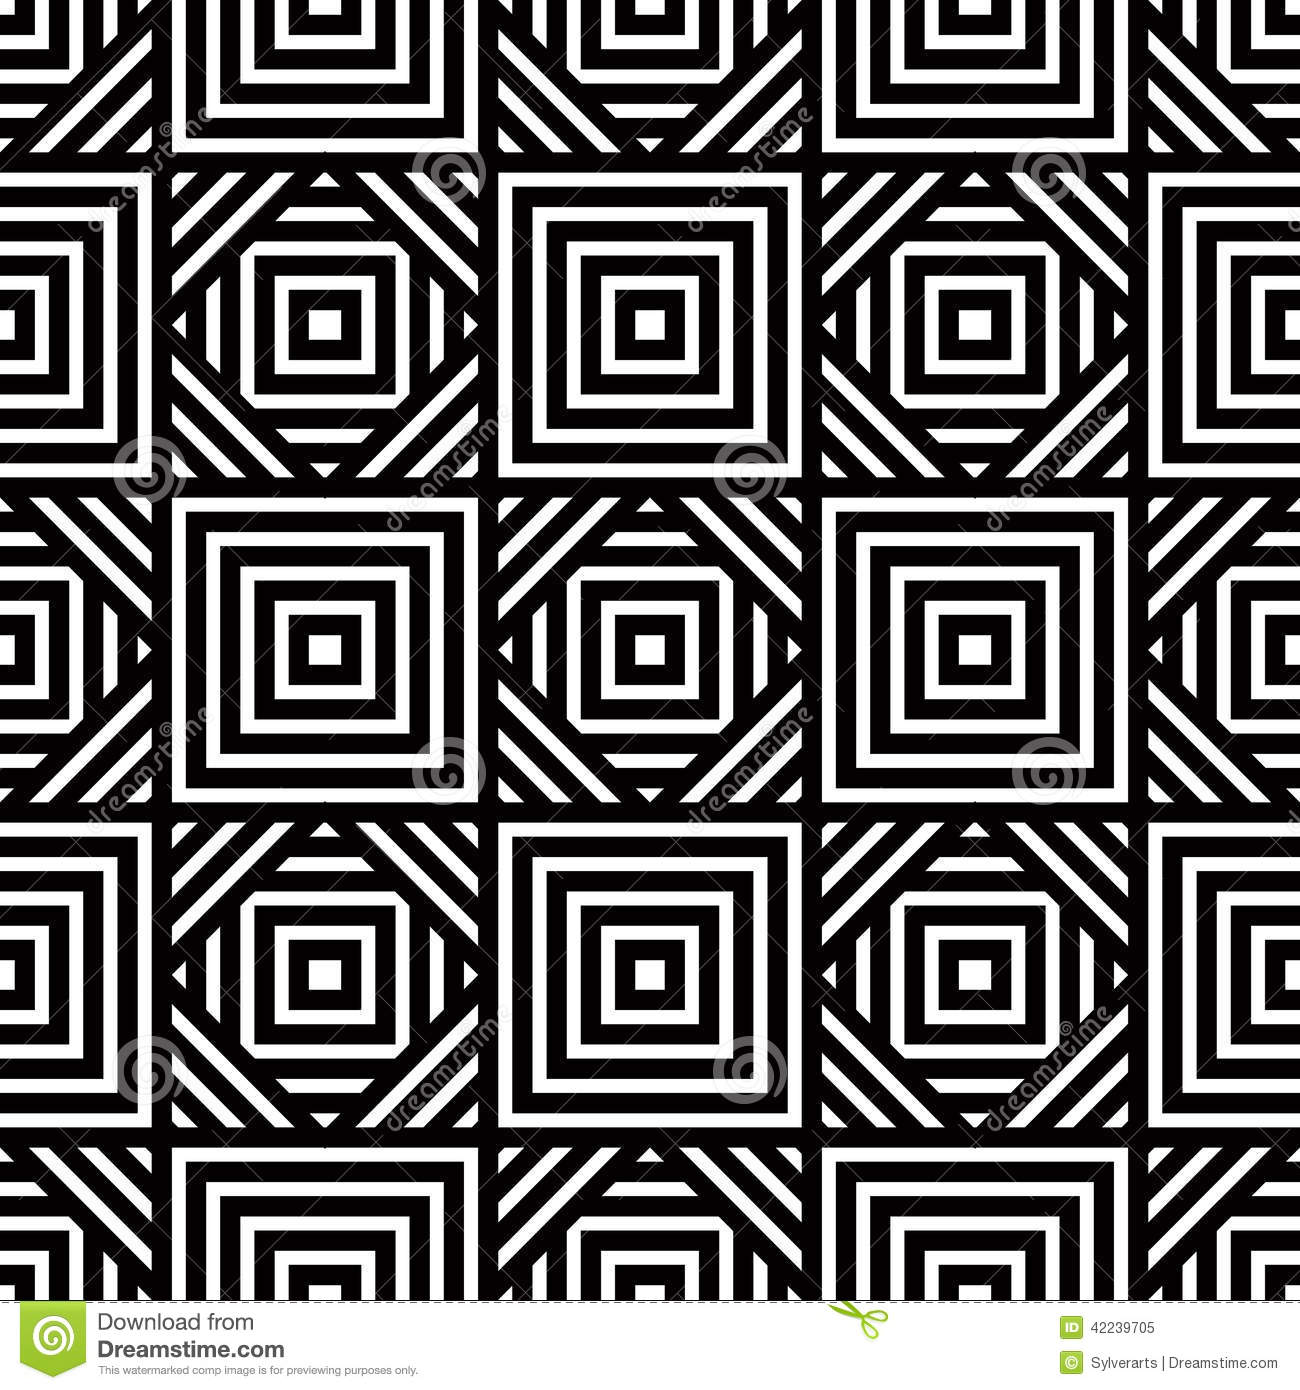 Simple Black and White Geometric Patterns